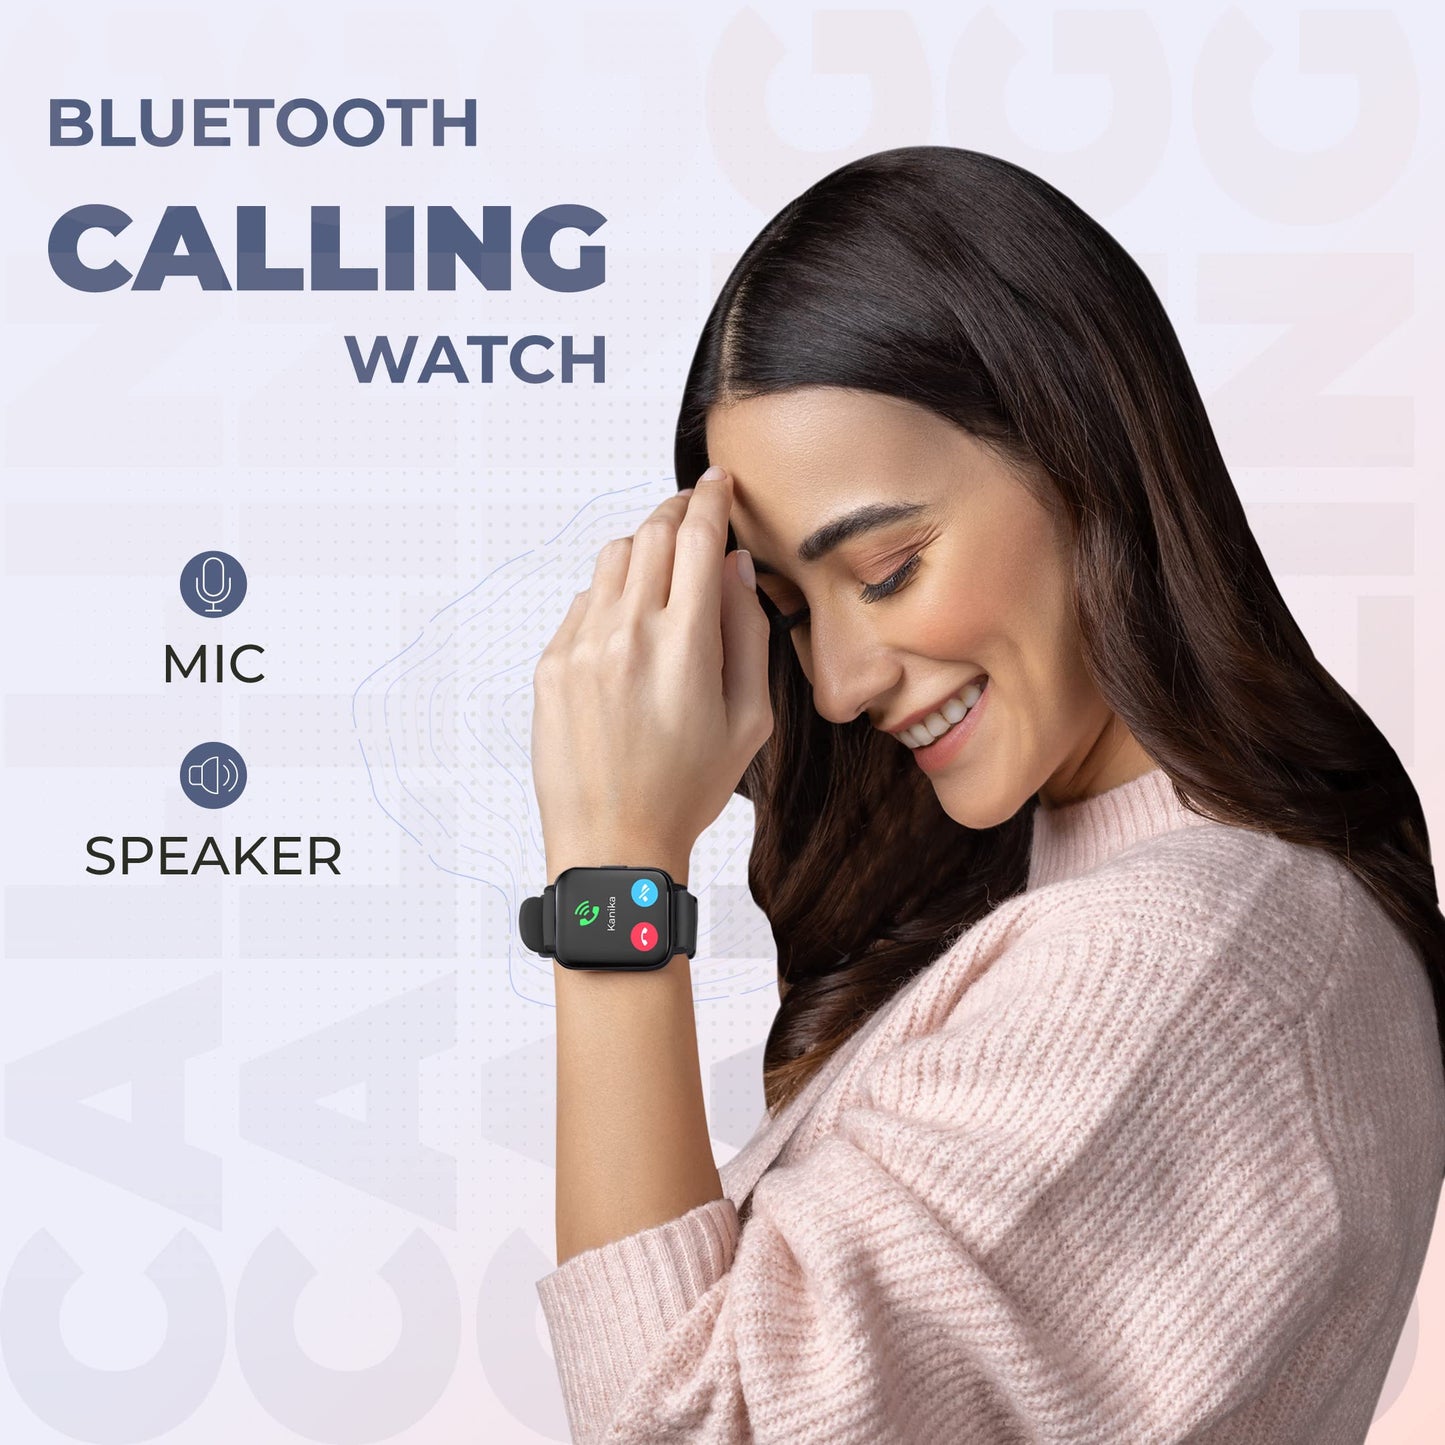 HAMMER Pulse 3.0 Bluetooth Calling Smart Watch with IP67 Rating & 1.69" Large Display with SpO2 Monitoring, Full Touch Screen & Multiple Watch Faces with Camera & Music Control (Black)